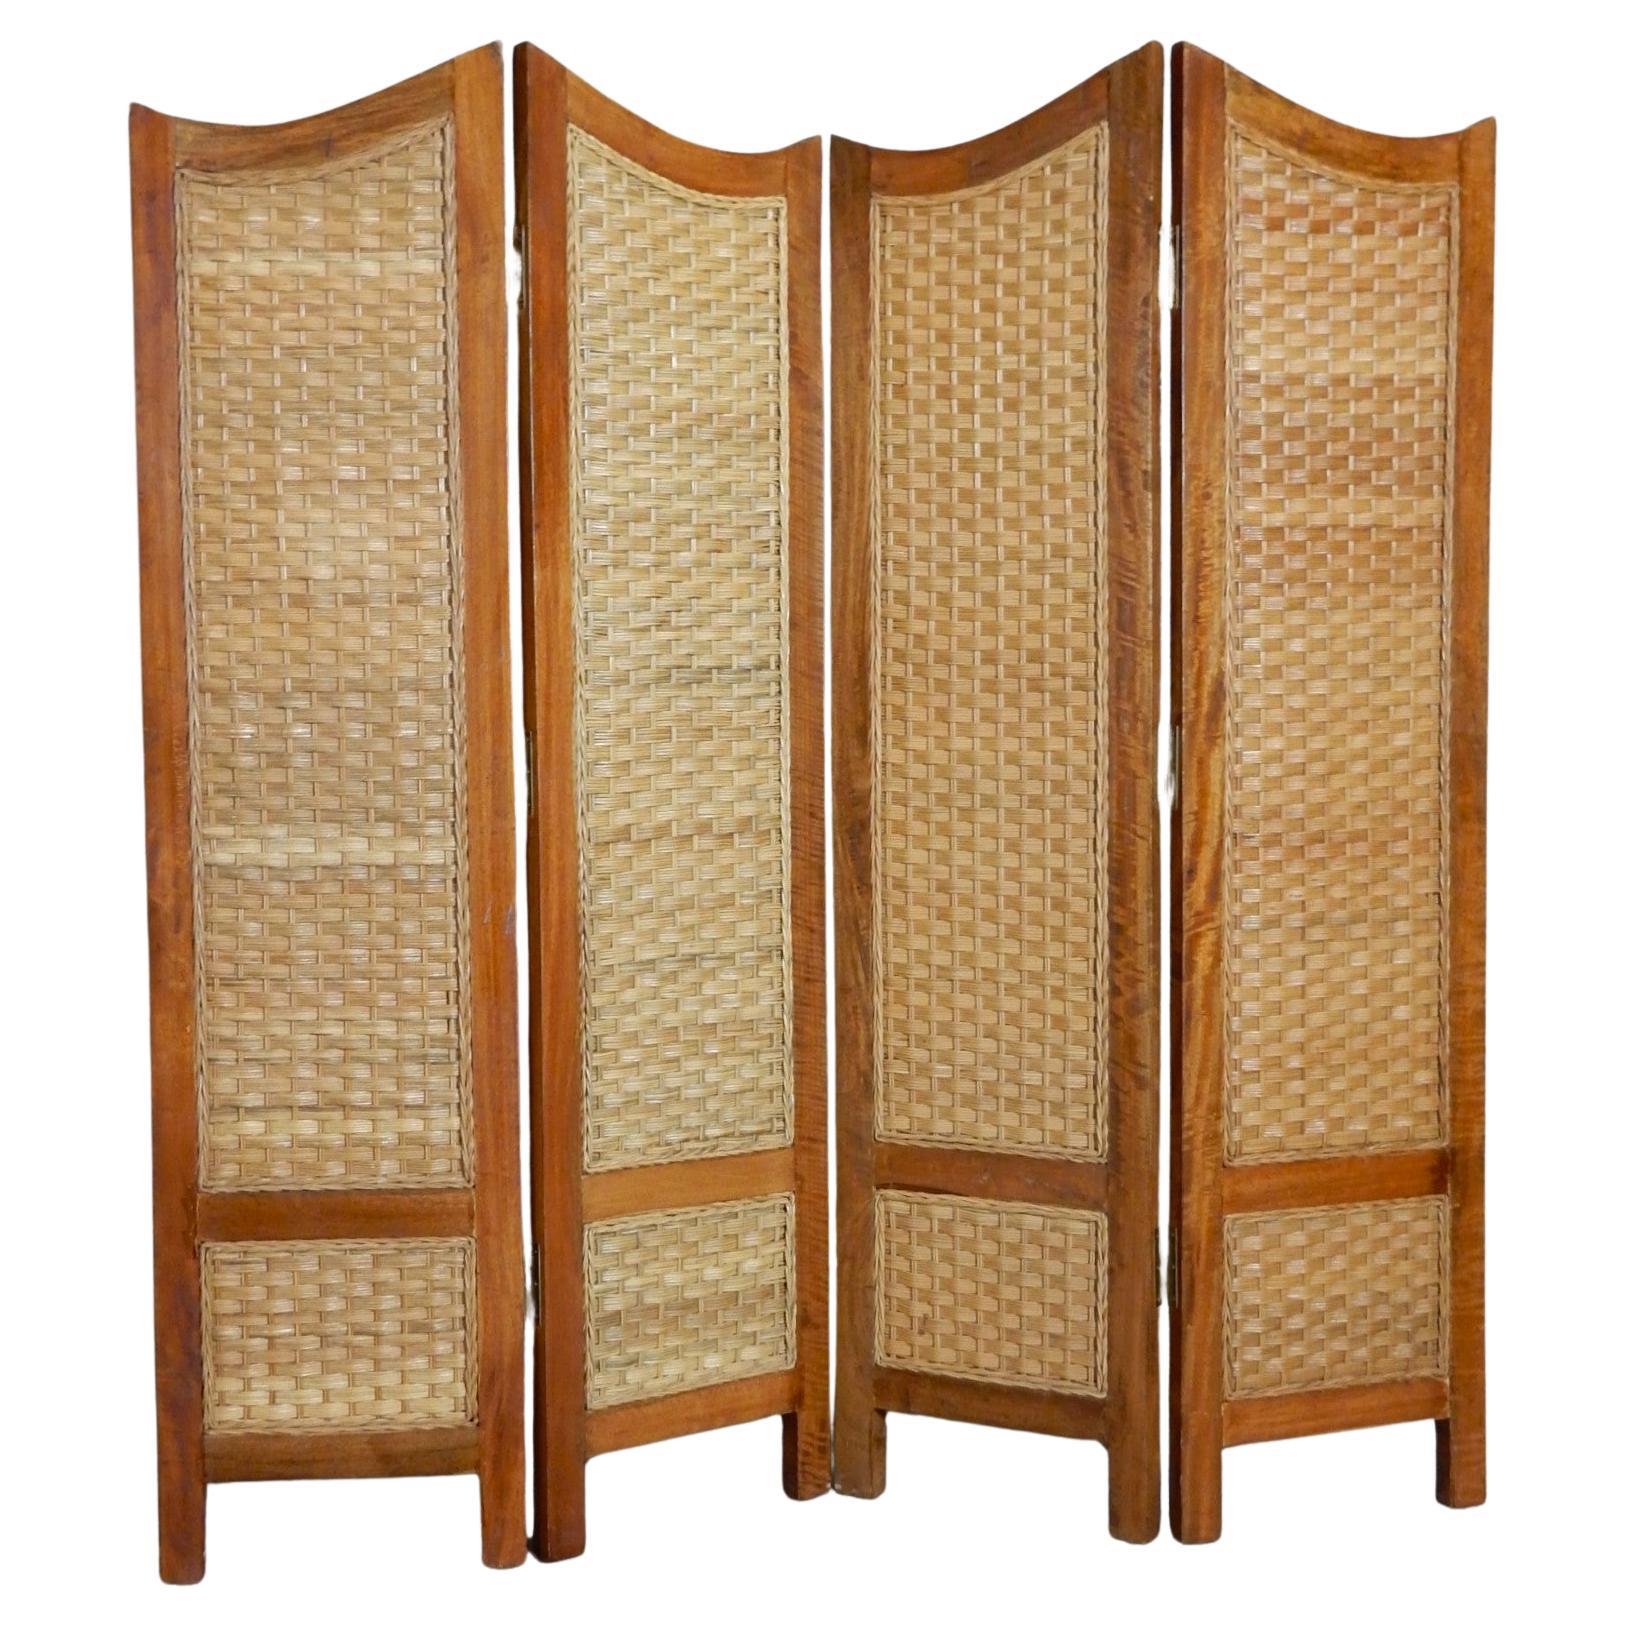 Mexican Modernism Woven Cane Rattan Screen Room Divider after Clara Porset For Sale 3